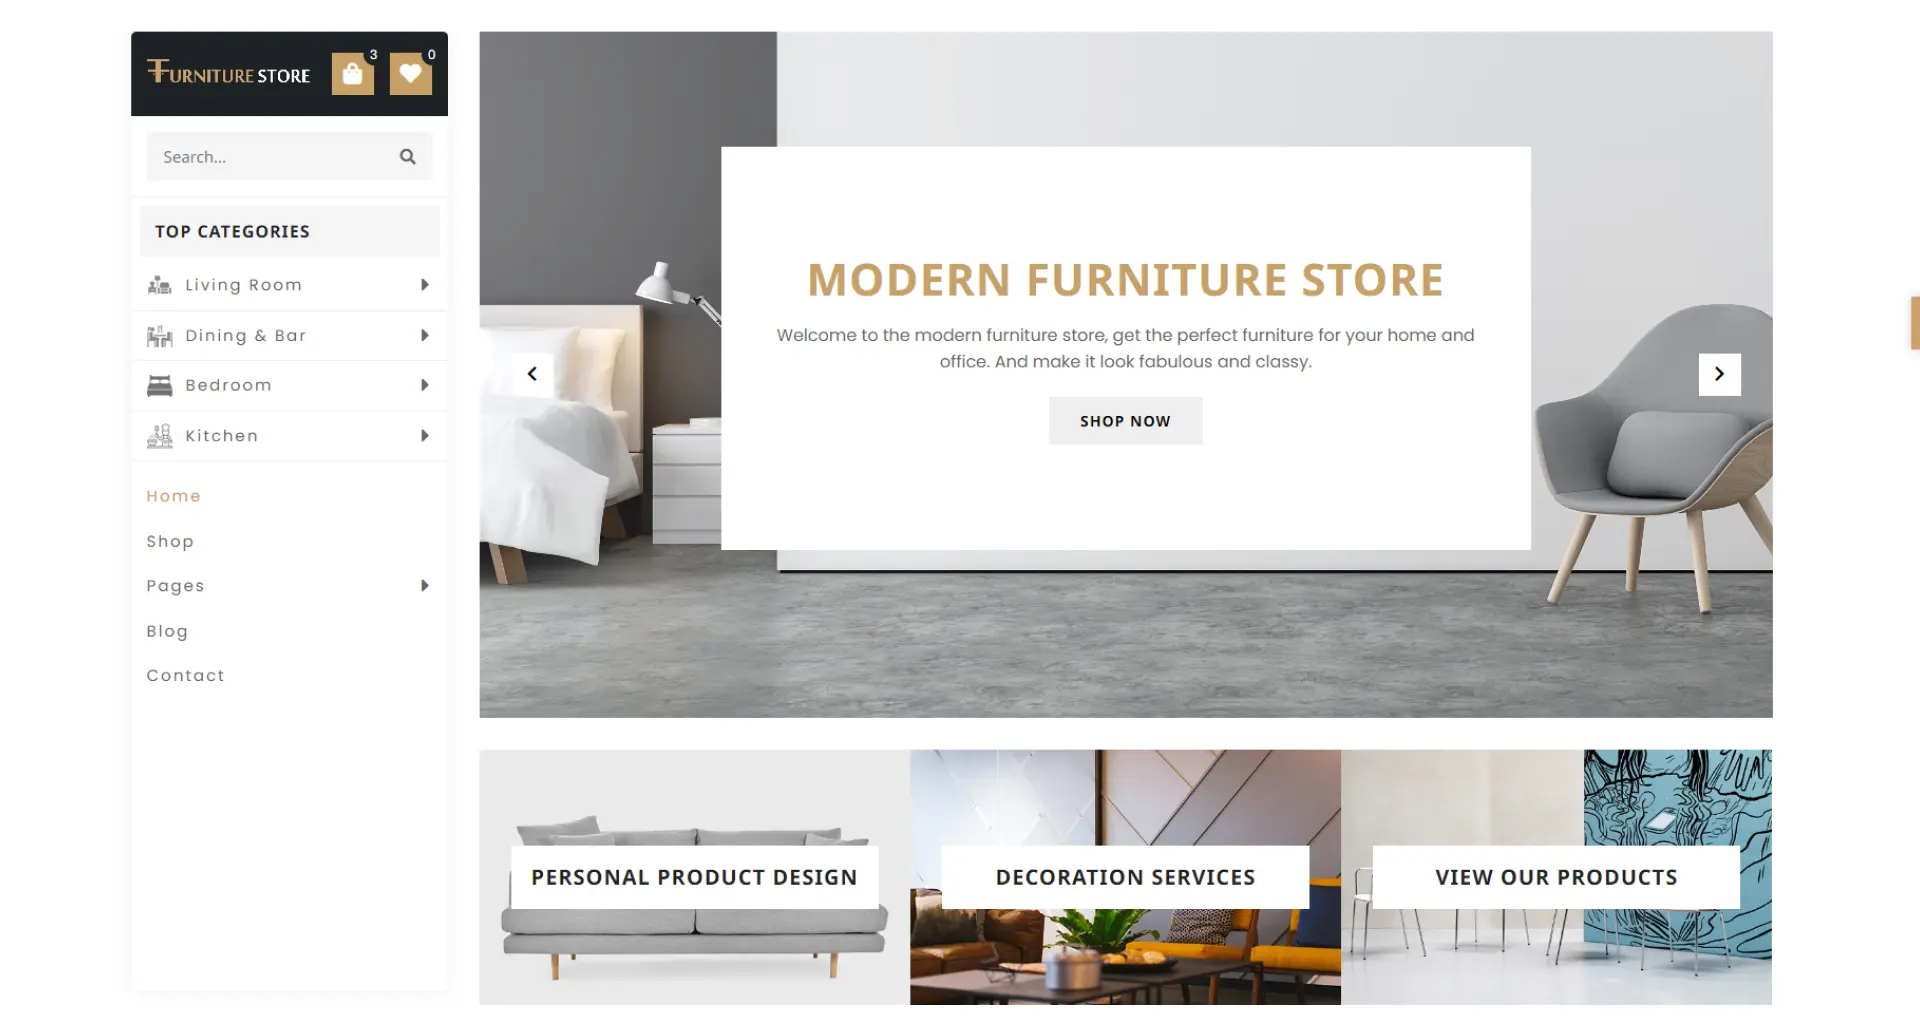 Modern furniture store page